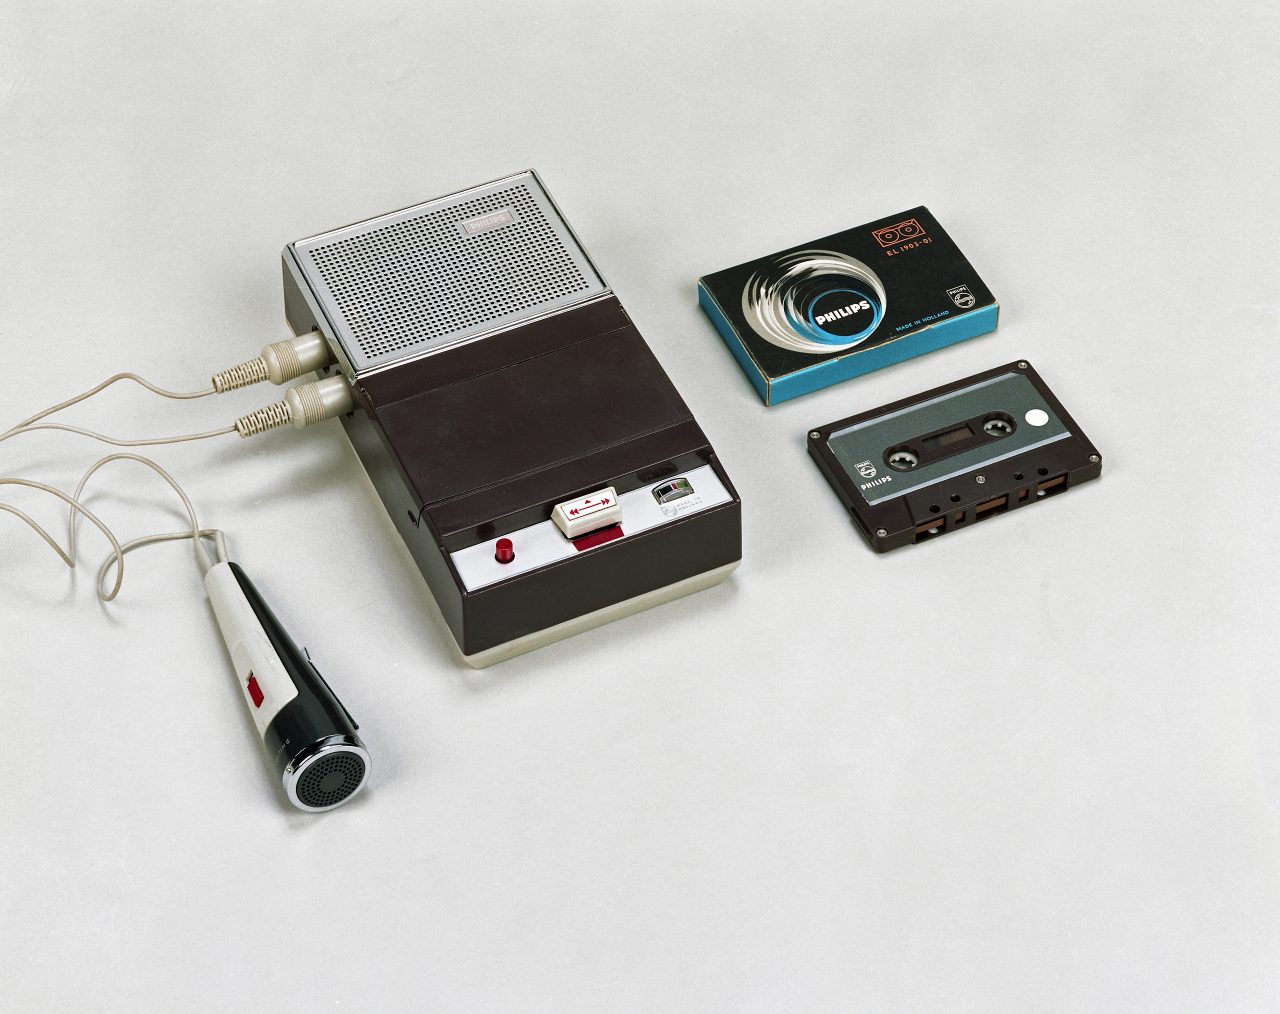 In August 1963, Philips introduced its first compact cassette recorder at the Funkausstellung (Radio Exhibition) in Berlin, Germany. When using this photo, please add photo credit: Photo: Royal Philips